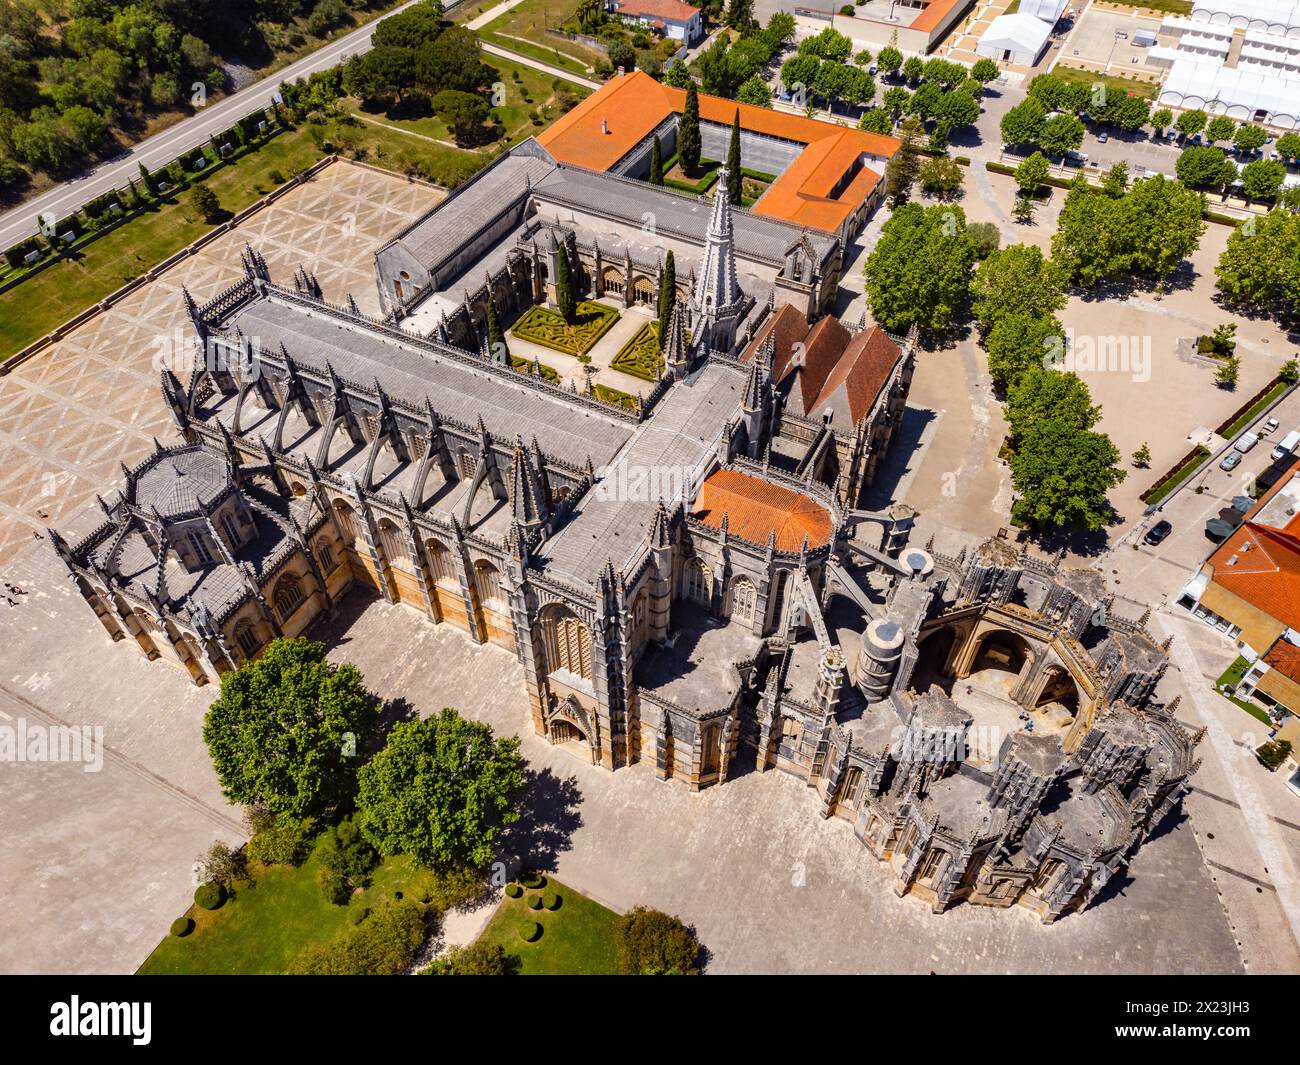 Aerial view of the impressive World Heritage Monastery of Mosteiro da Batalha with church and cloister, Portugal Stock Photo